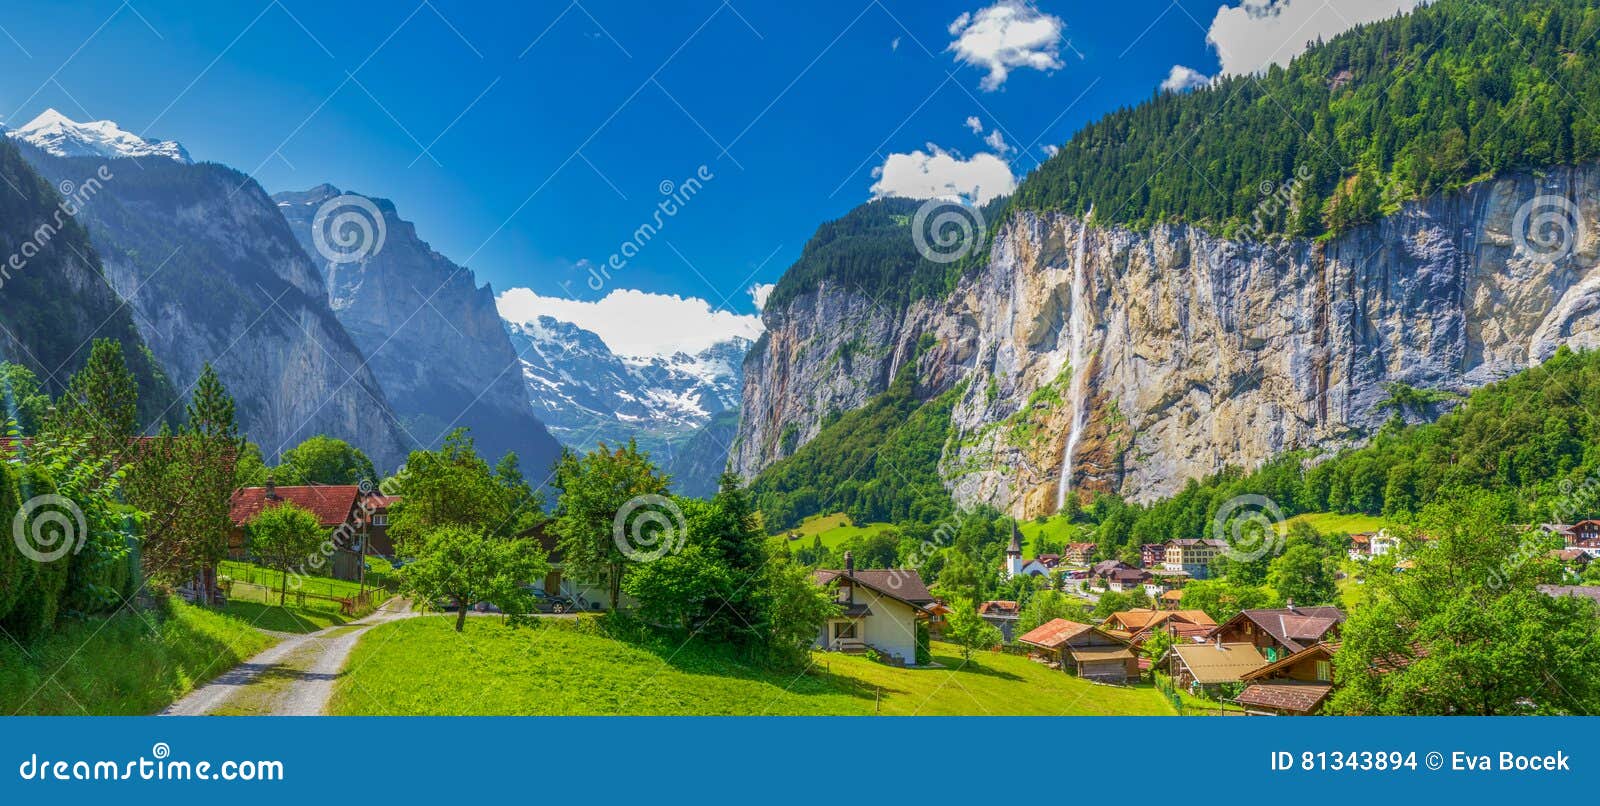 famous lauterbrunnen valley with gorgeous waterfall and swiss alps